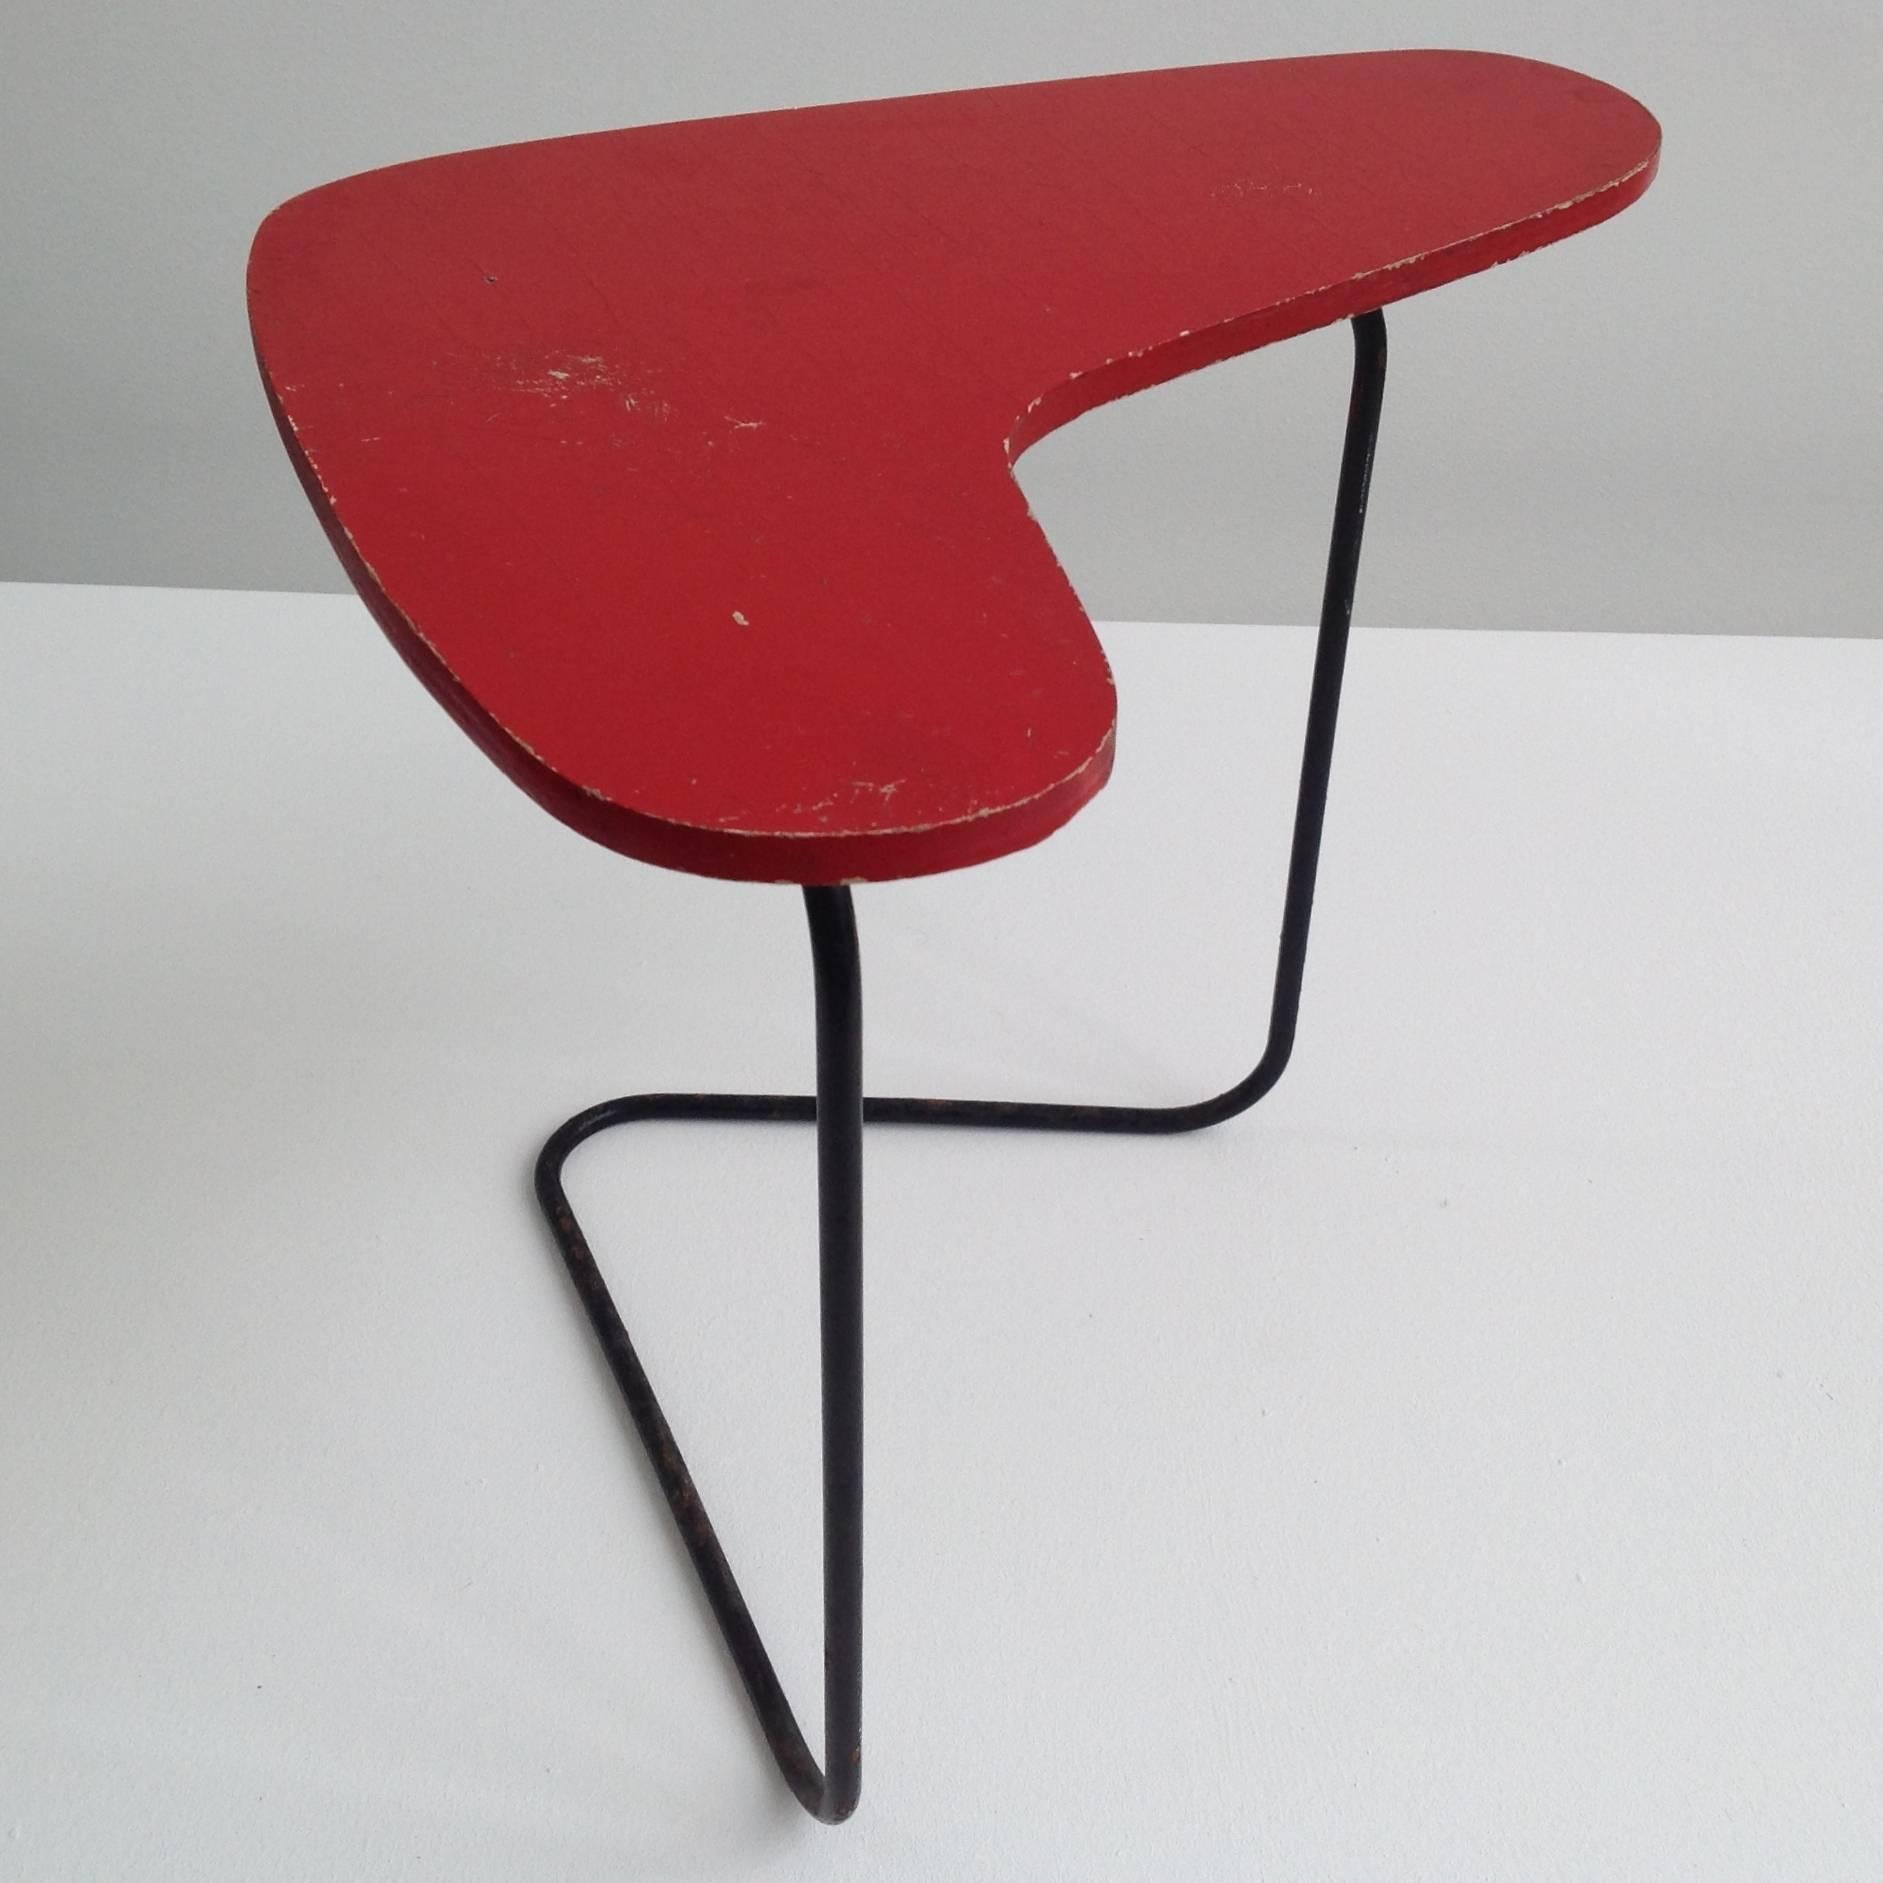 Very rare and hard to find, this small first edition G1 boomerang table.
Willy Van Der Meeren (1923-2002) was a famous Belgian architect.
Known by collectors.

More pictures and with a higher resolution are available on request. With over 25